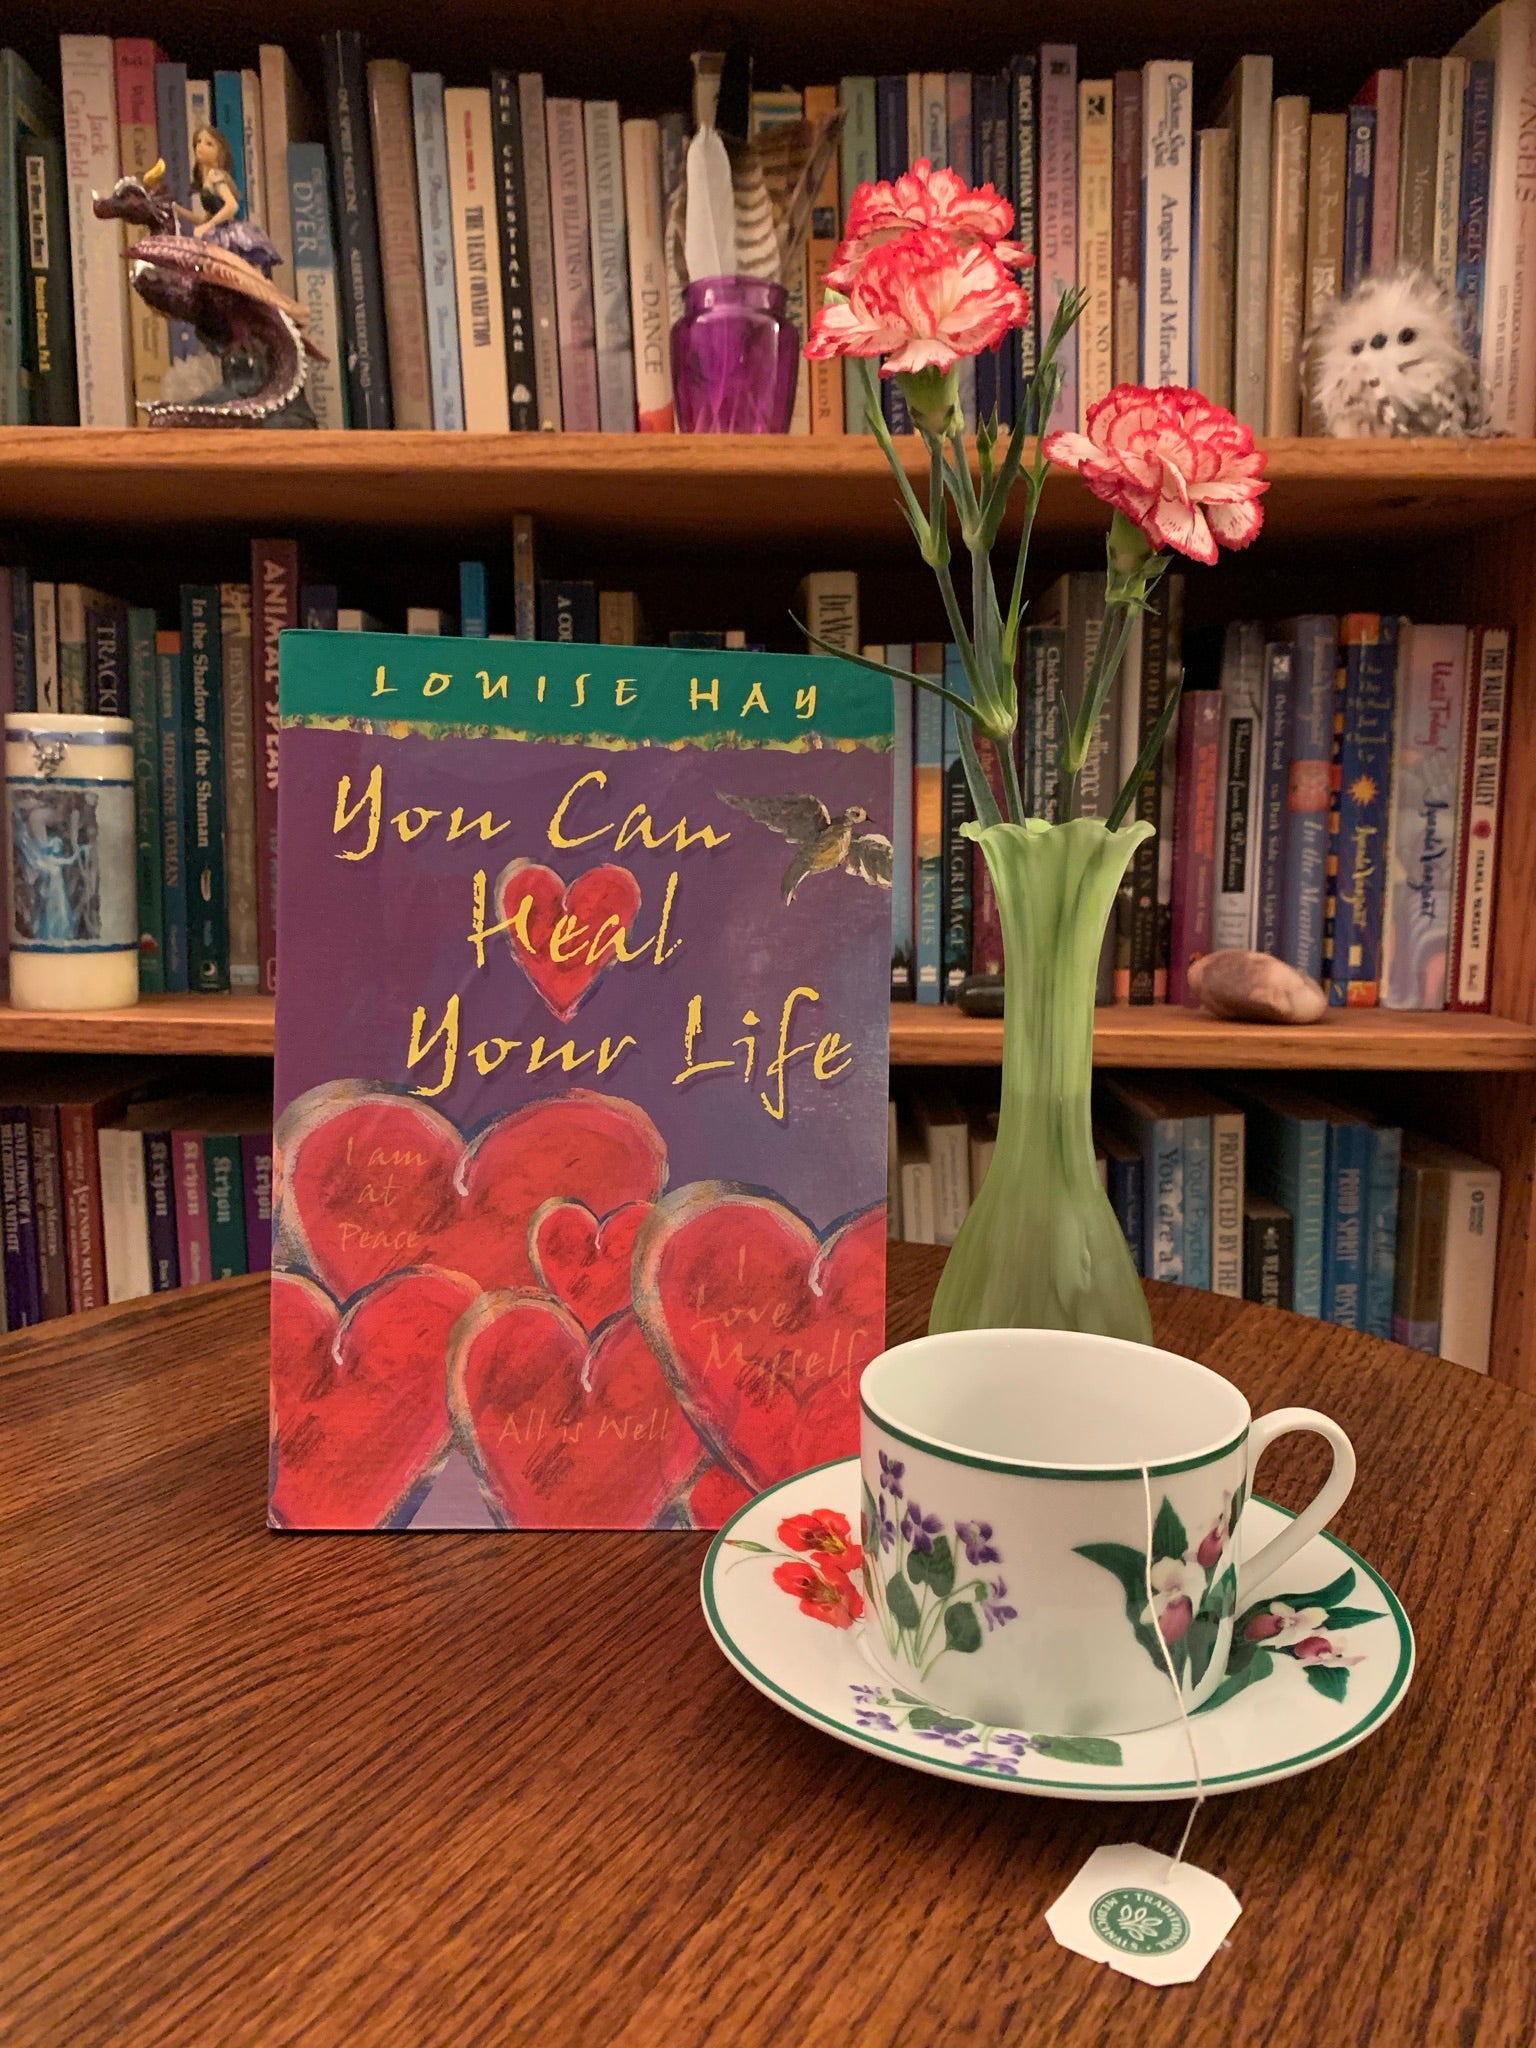 You Can Heal Your Life (gift edition with beautiful illustrations) by the amazing Louise Hay. This is one of the first books I ever read as I transformed my own life spiritually and re-oriented my belief about healing to a holistic and natural approach. It is a wonderful book with profound information about healing, self-healing and self-love, in which Hay tells her own story of transformation and healing and of how she beat cancer in natural ways. Cost is $24.99.